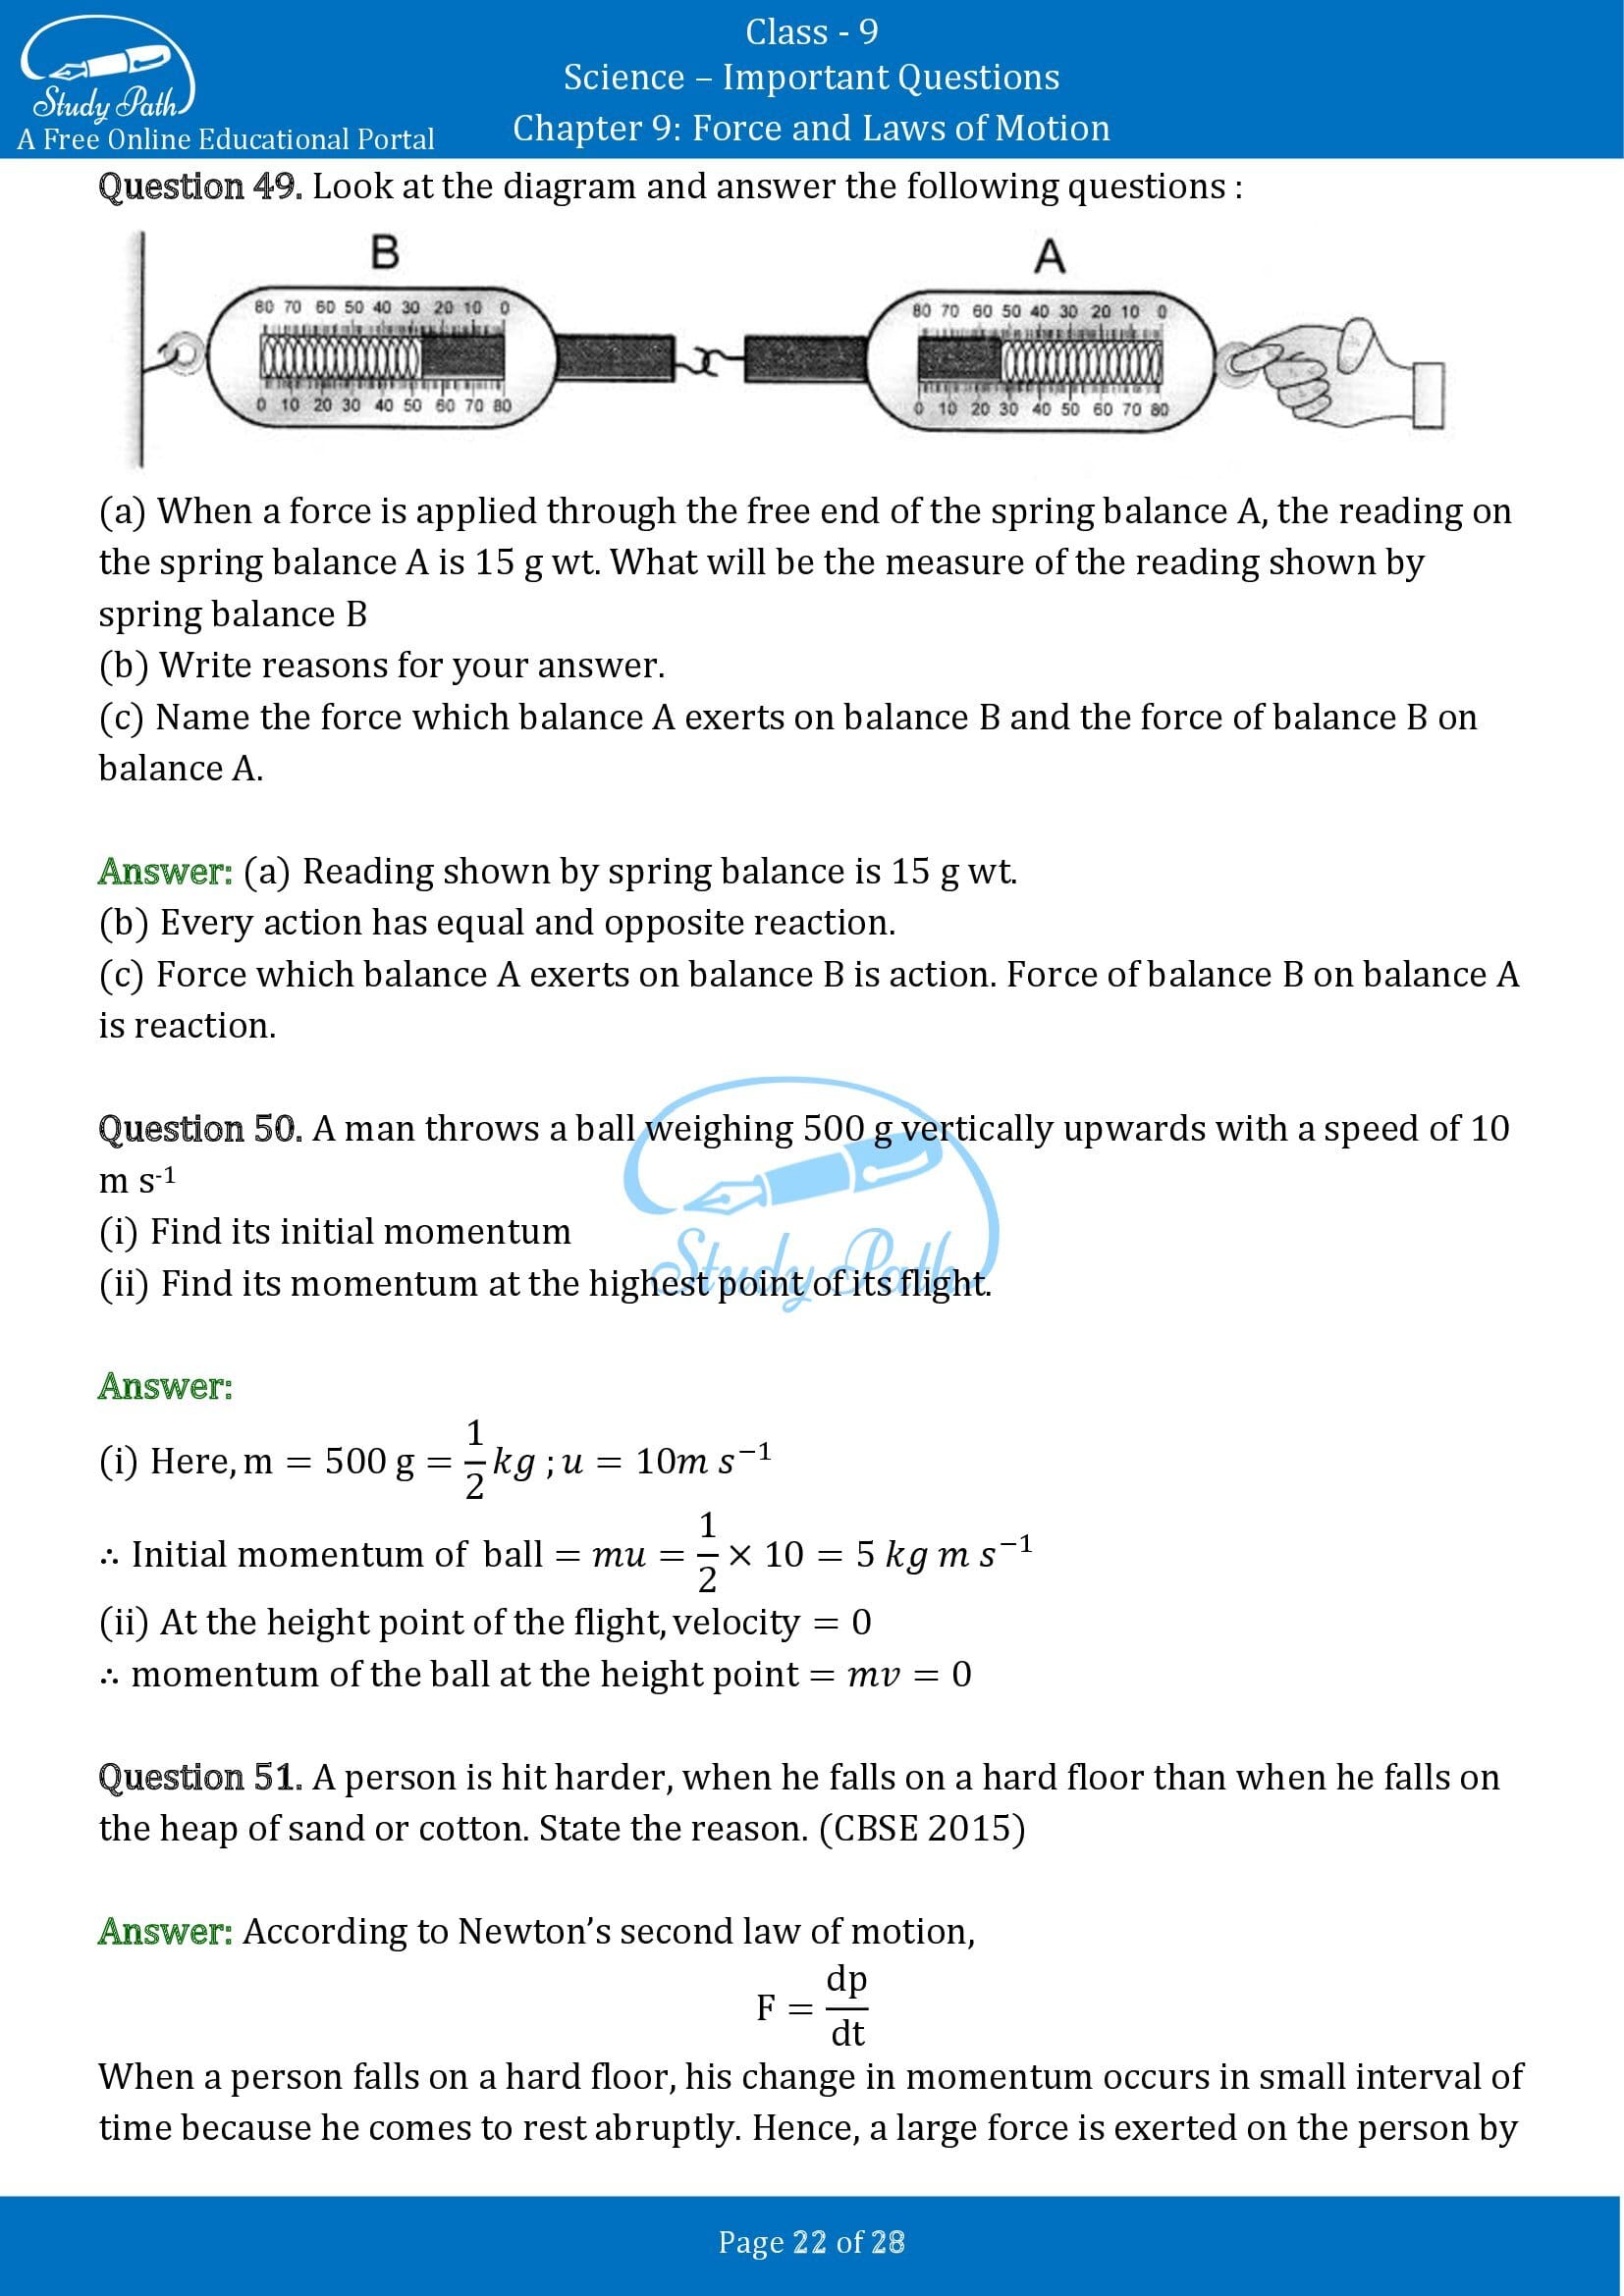 Important Questions for Class 9 Science Chapter 9 Force and Laws of Motion 00022